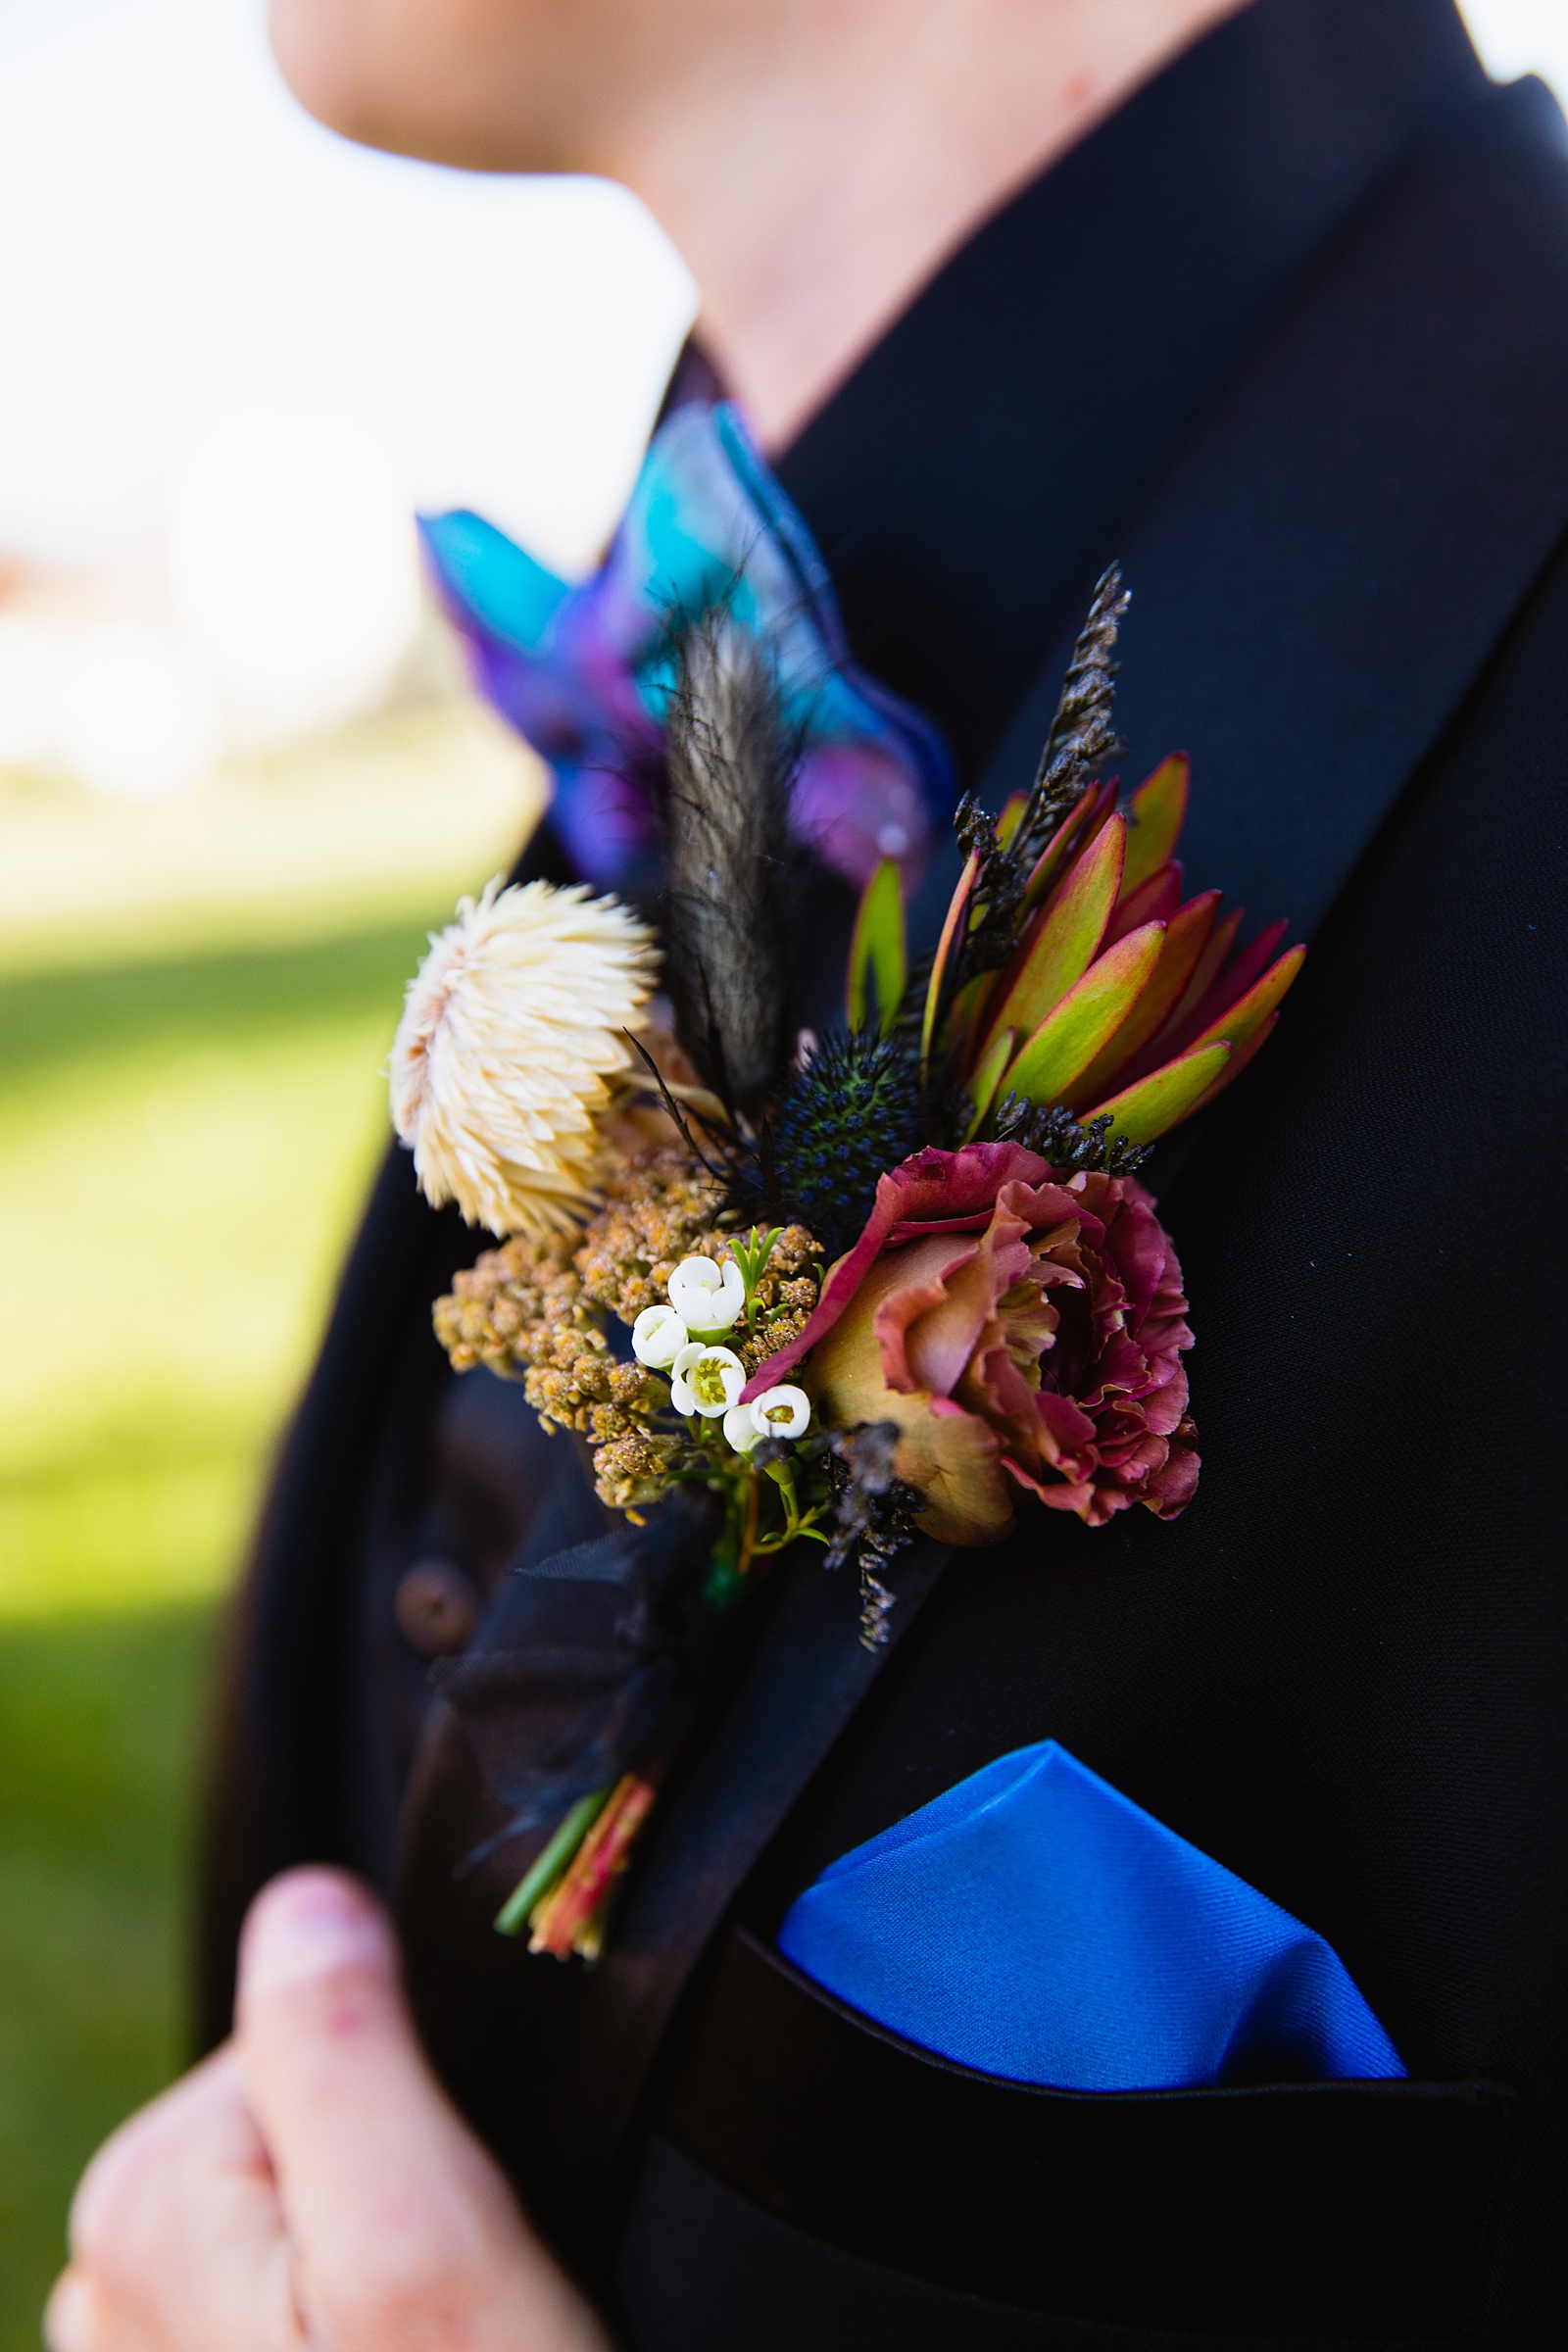 Brides's wedding day details dried flower and rose boutonniere and purple pocket square by PMA Photography.